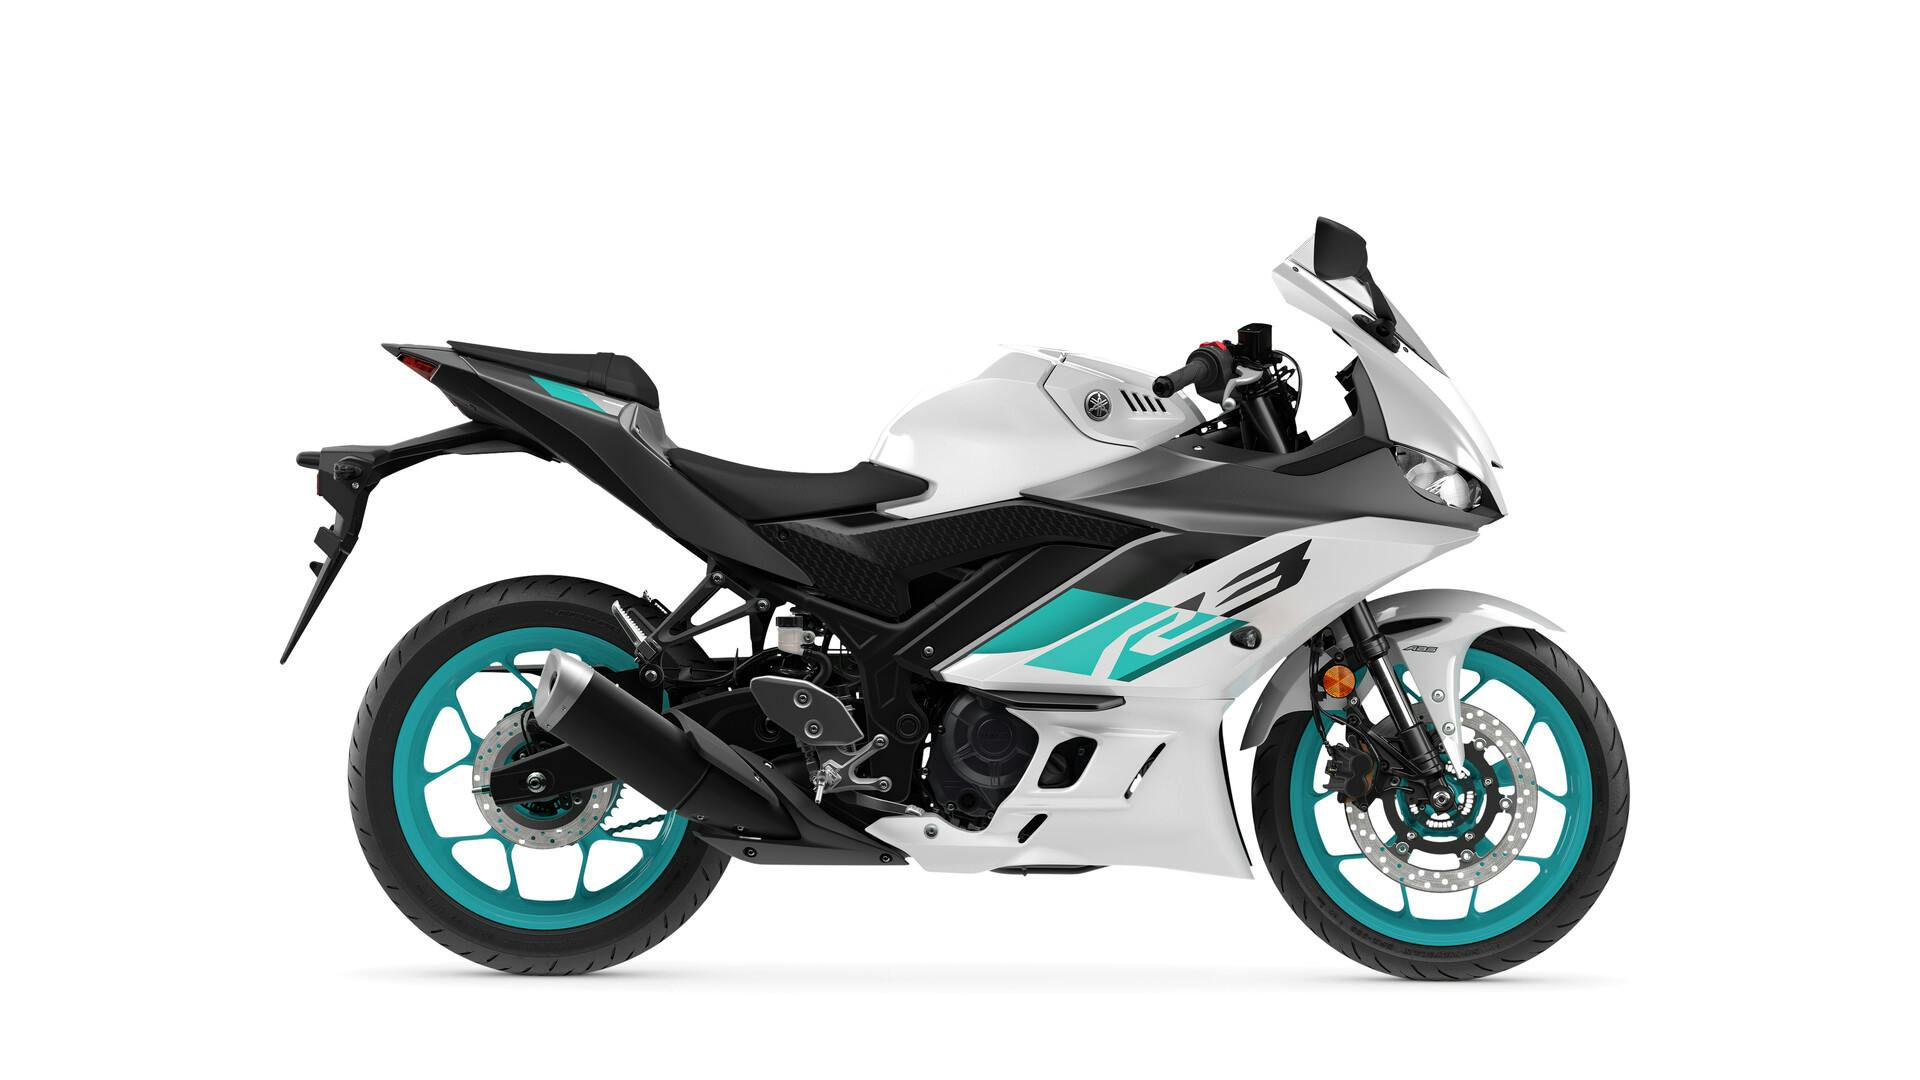 Yamaha YZF-R3 in intensity white colour